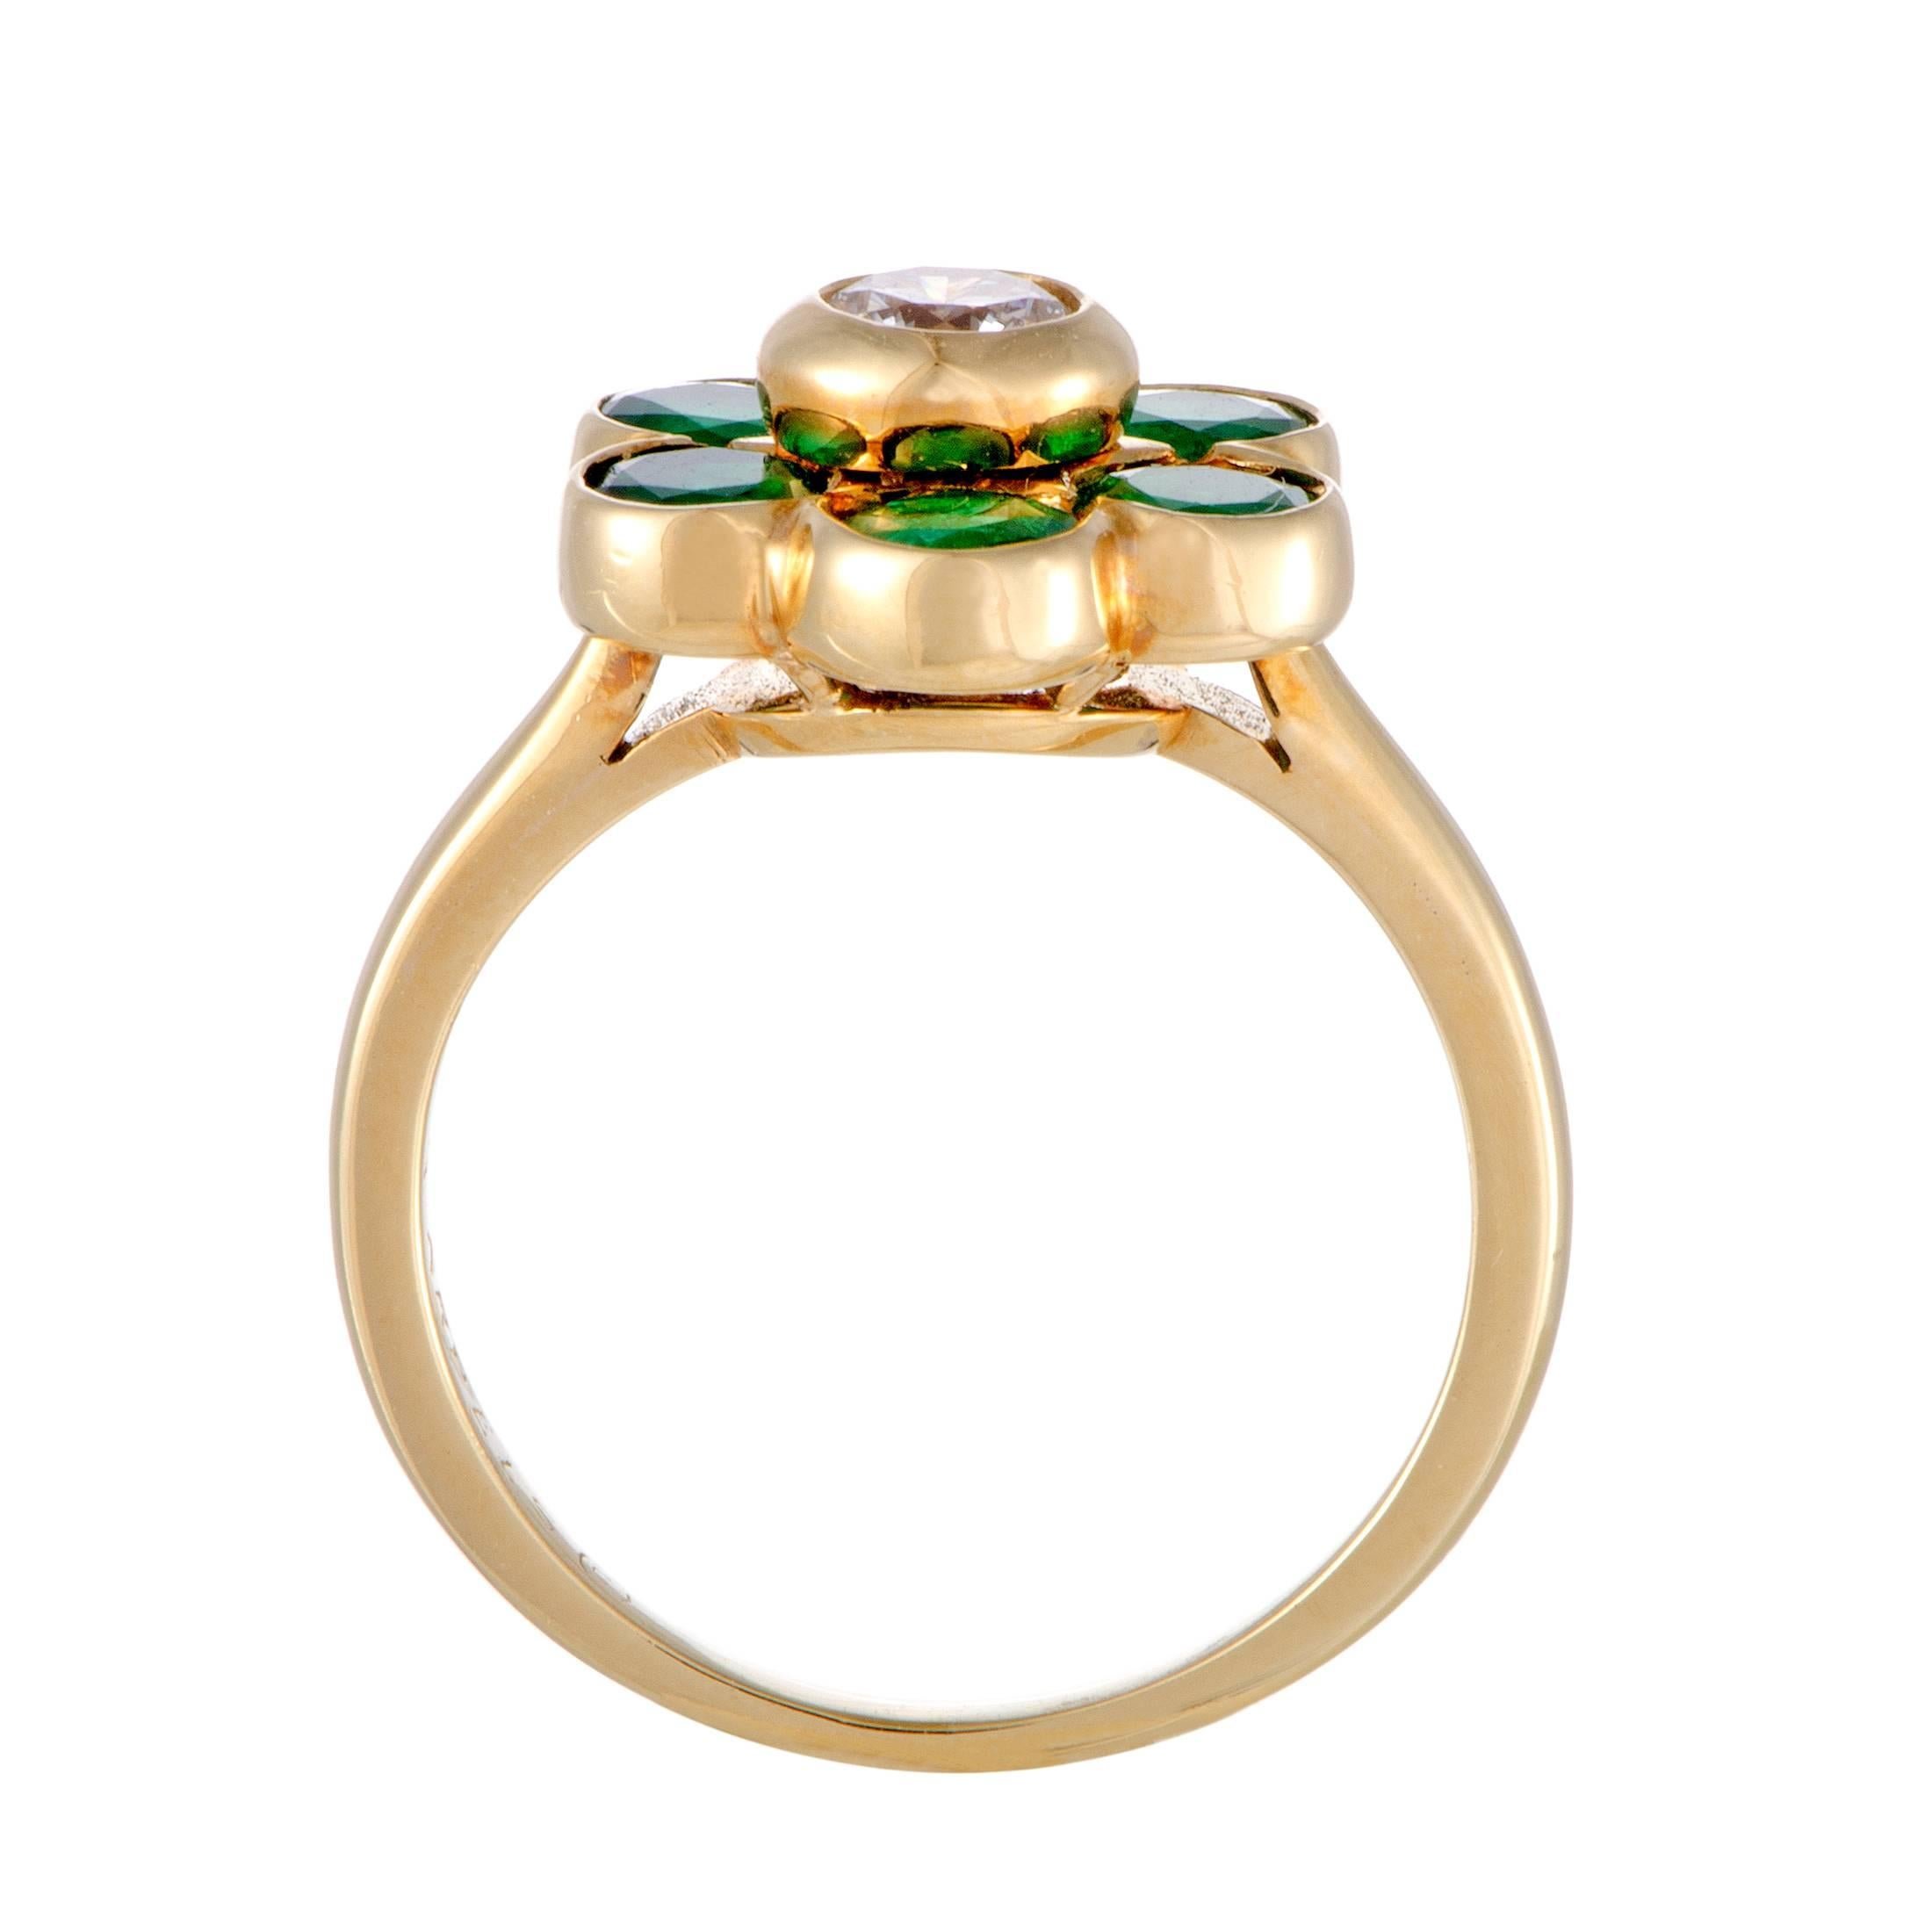 Brilliantly complemented by the vivacious emeralds weighing in total 1.00 carat, the nifty central diamond weighing 0.25ct tops off a charming depiction of a flower in this gorgeous 18K yellow gold ring from Van Cleef & Arpels.
Included Items: